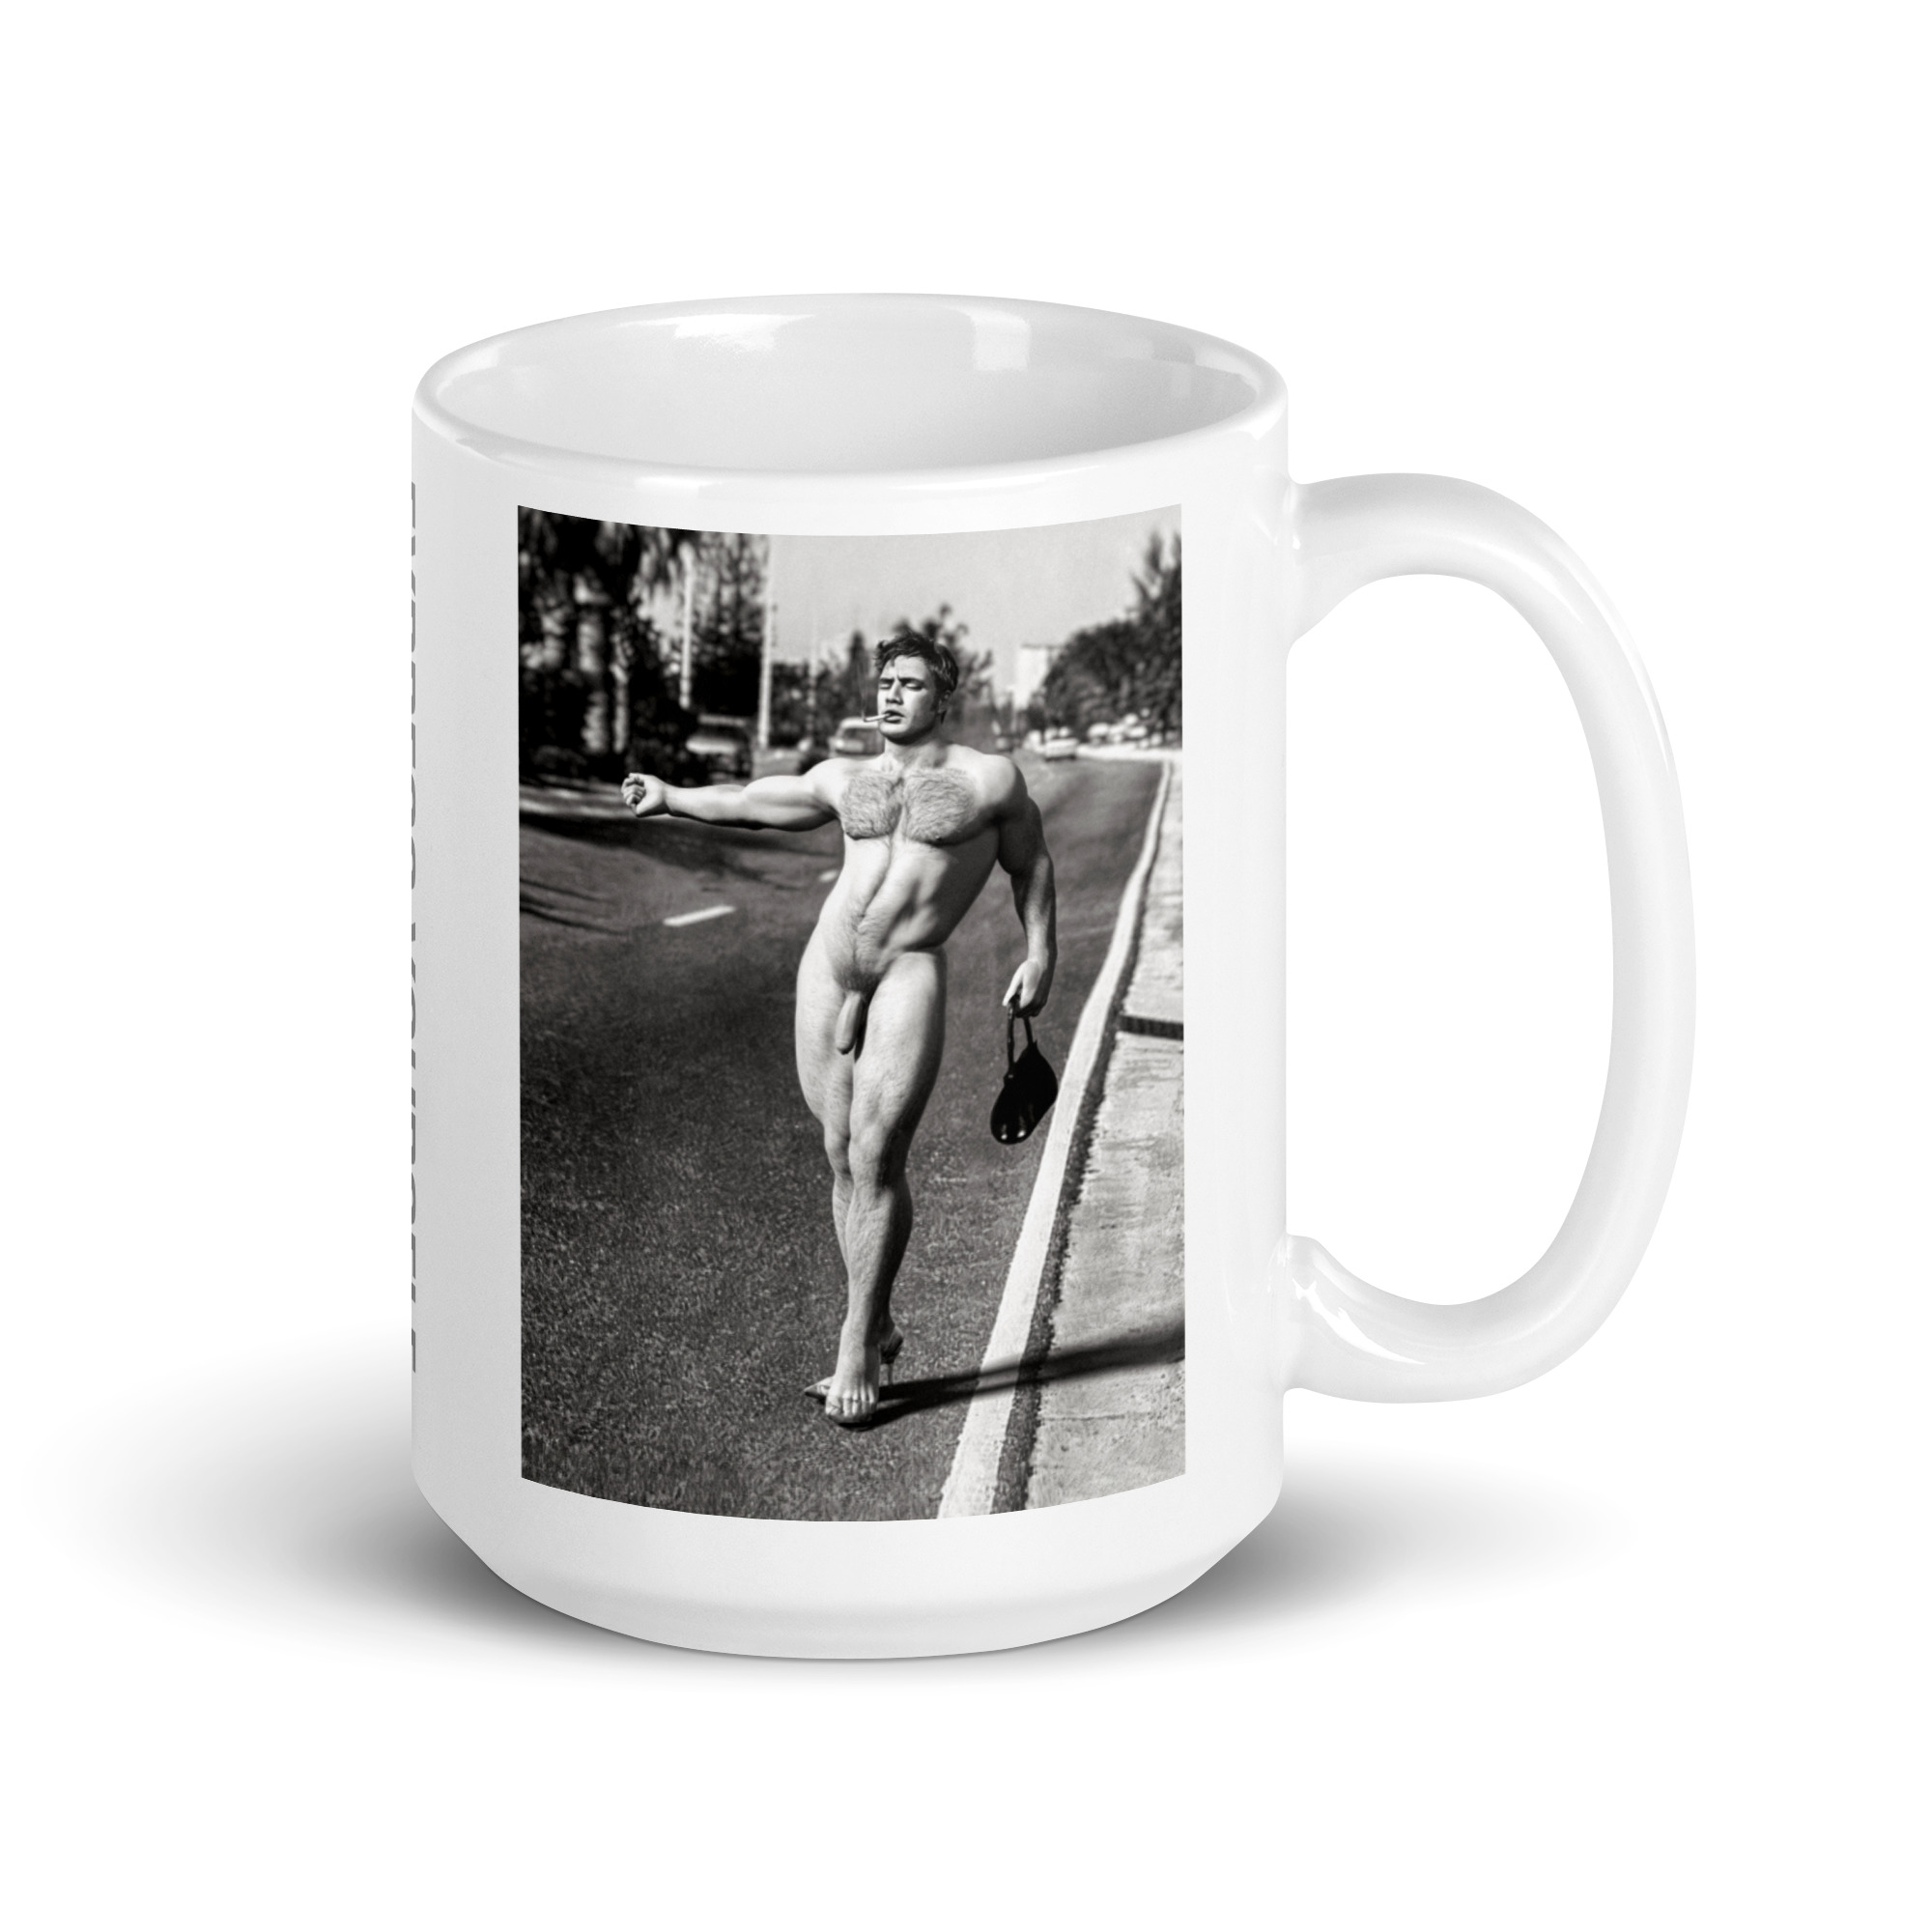 Featured image for “Express Yourself - White glossy mug”